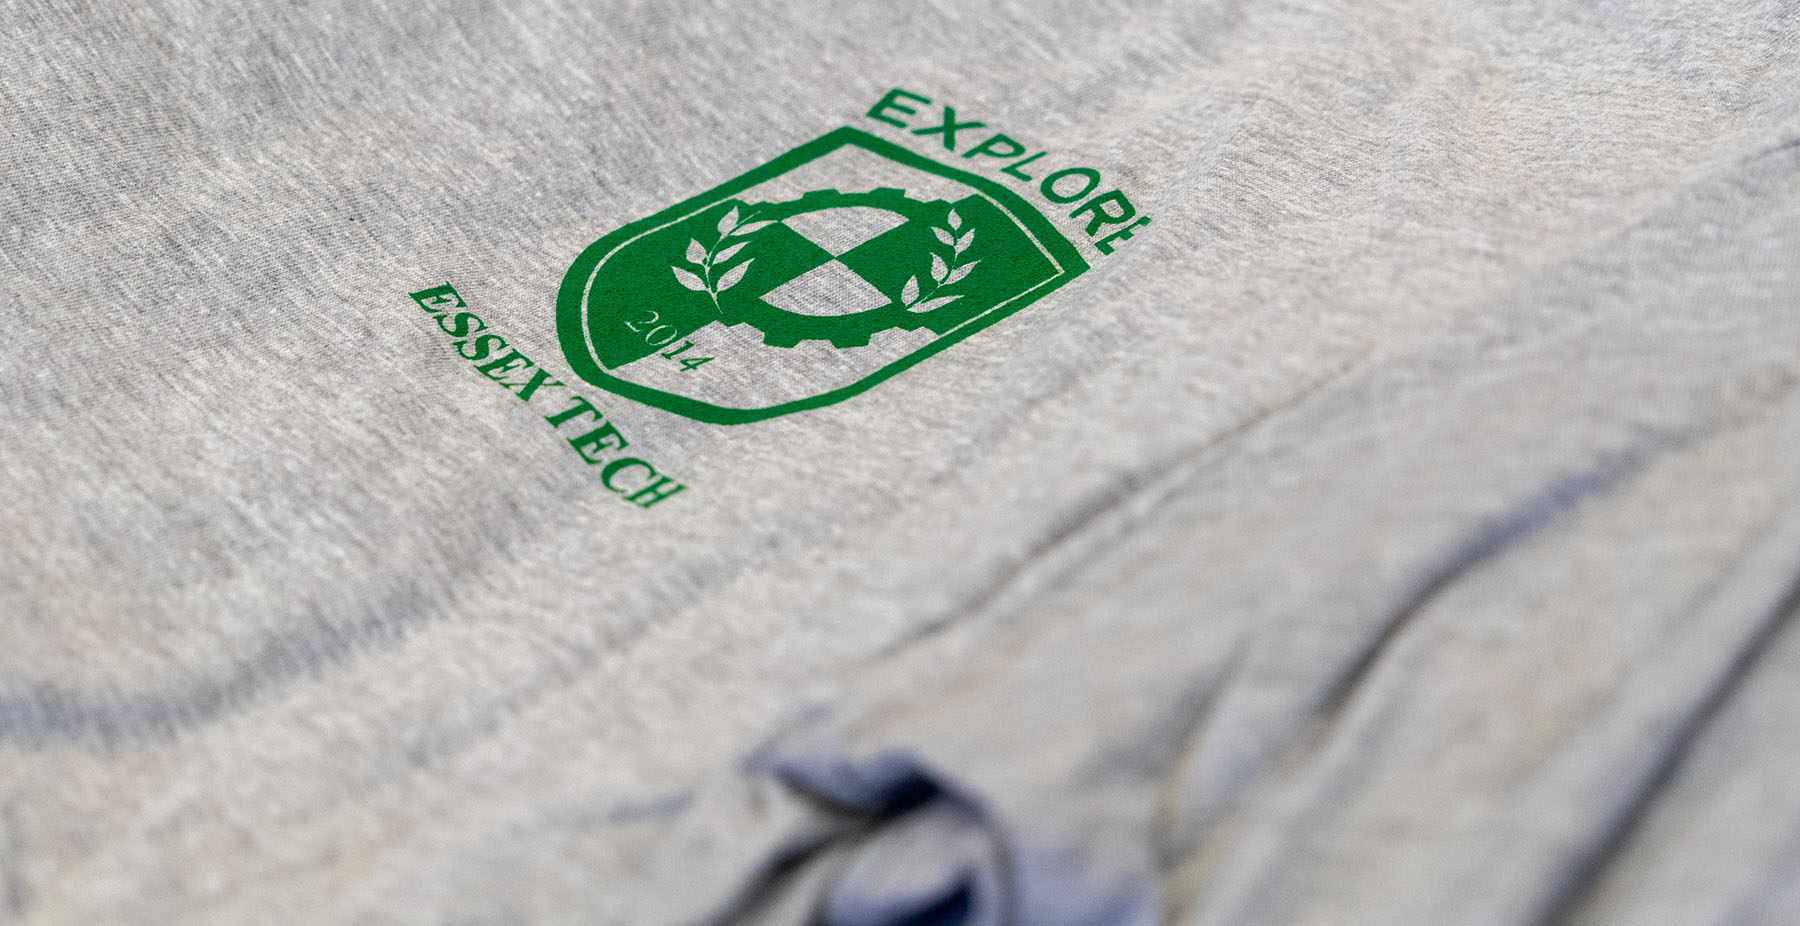 T-shirt with imprint of school logo and the word "explore".